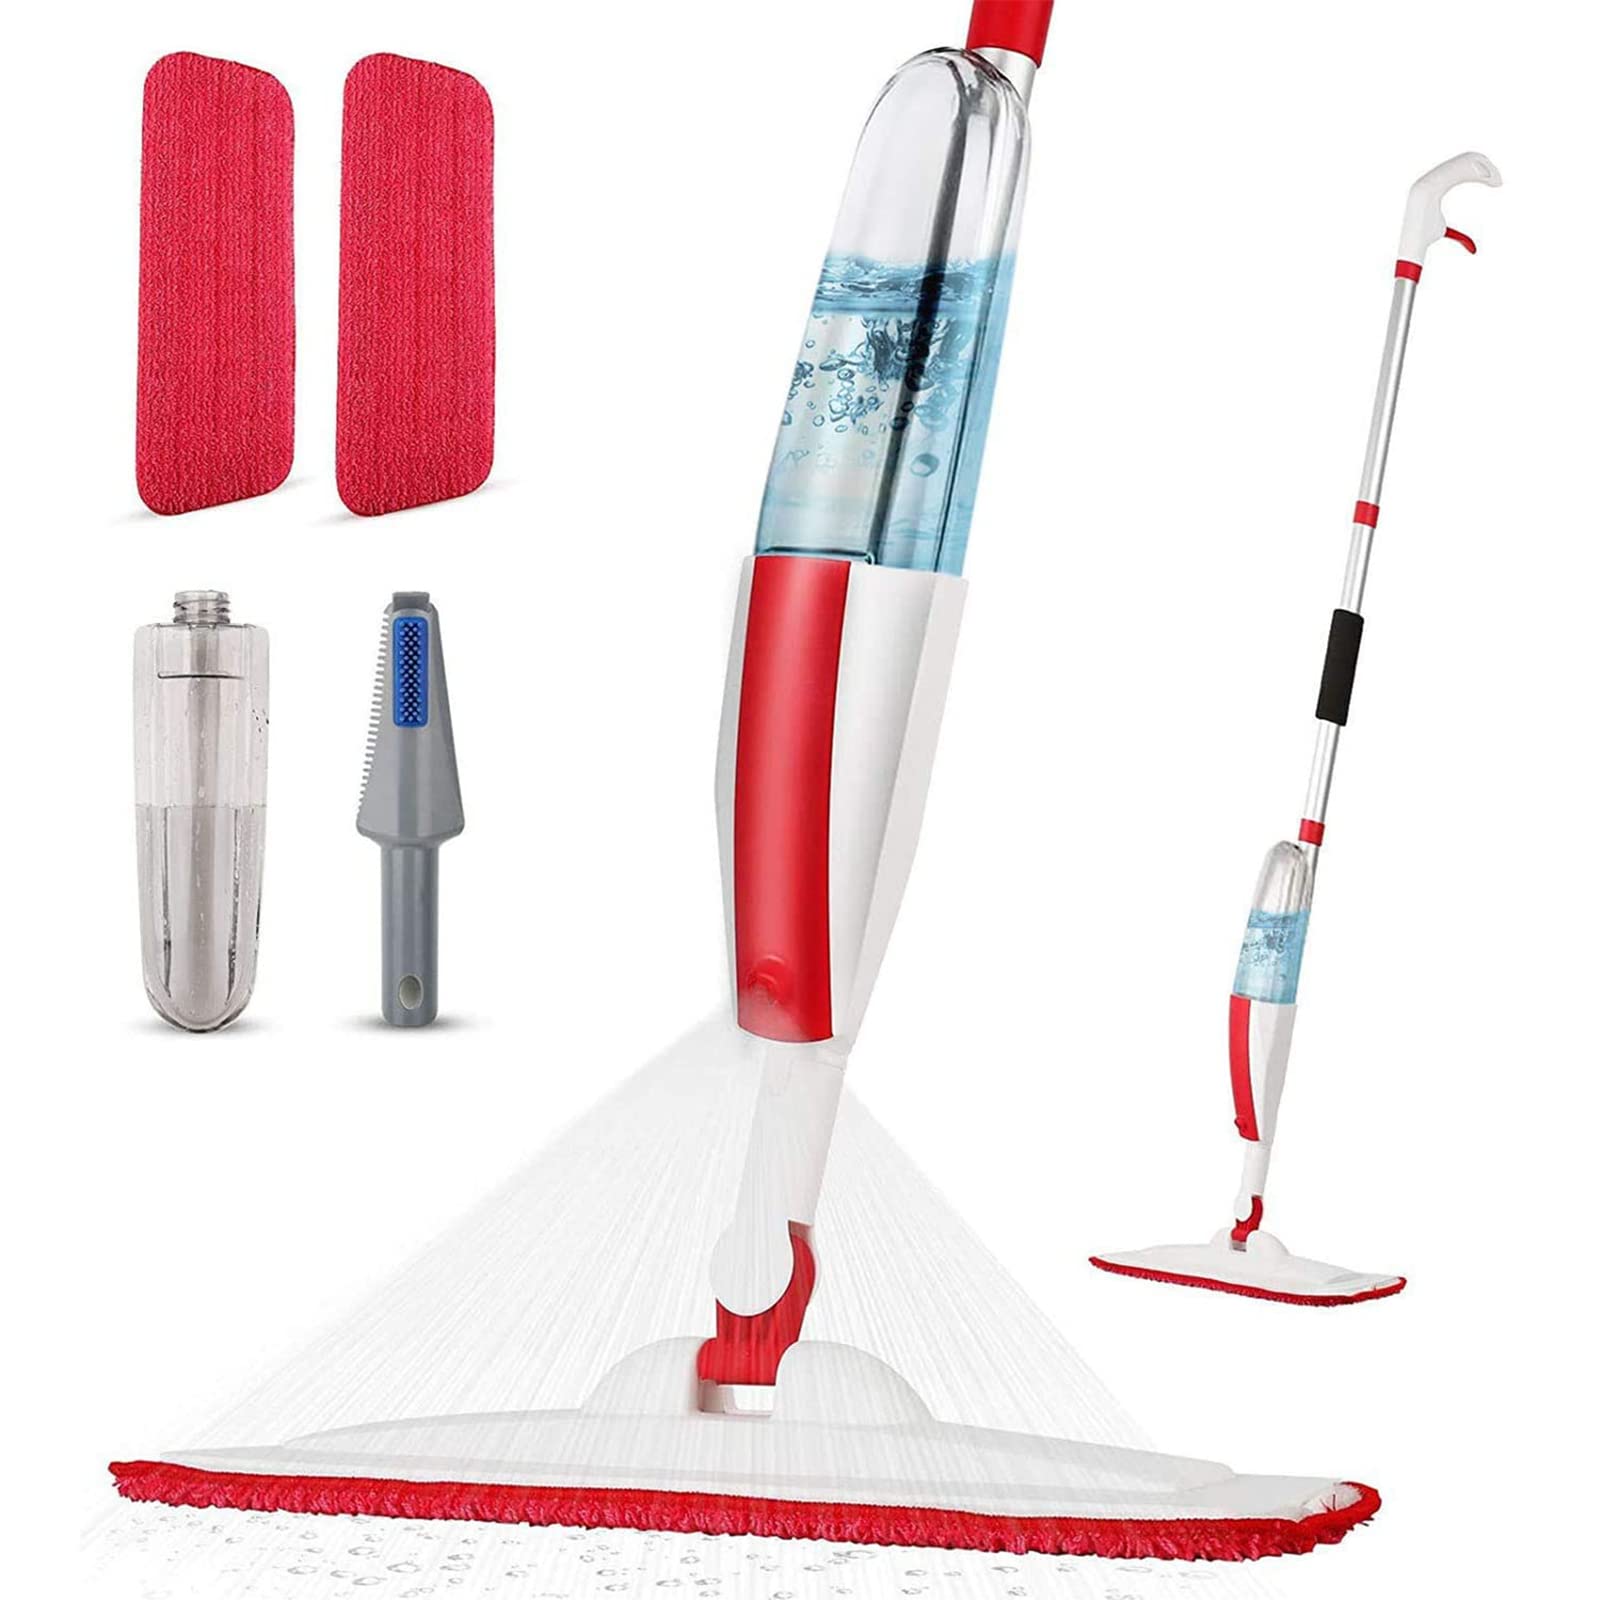 Mops for Floor Cleaning Wet Spray Mop with 14 oz Refillable Bottle and 2 Washable Microfiber Pads Home or Commercial Use Dry Wet Flat Mop - $17.99